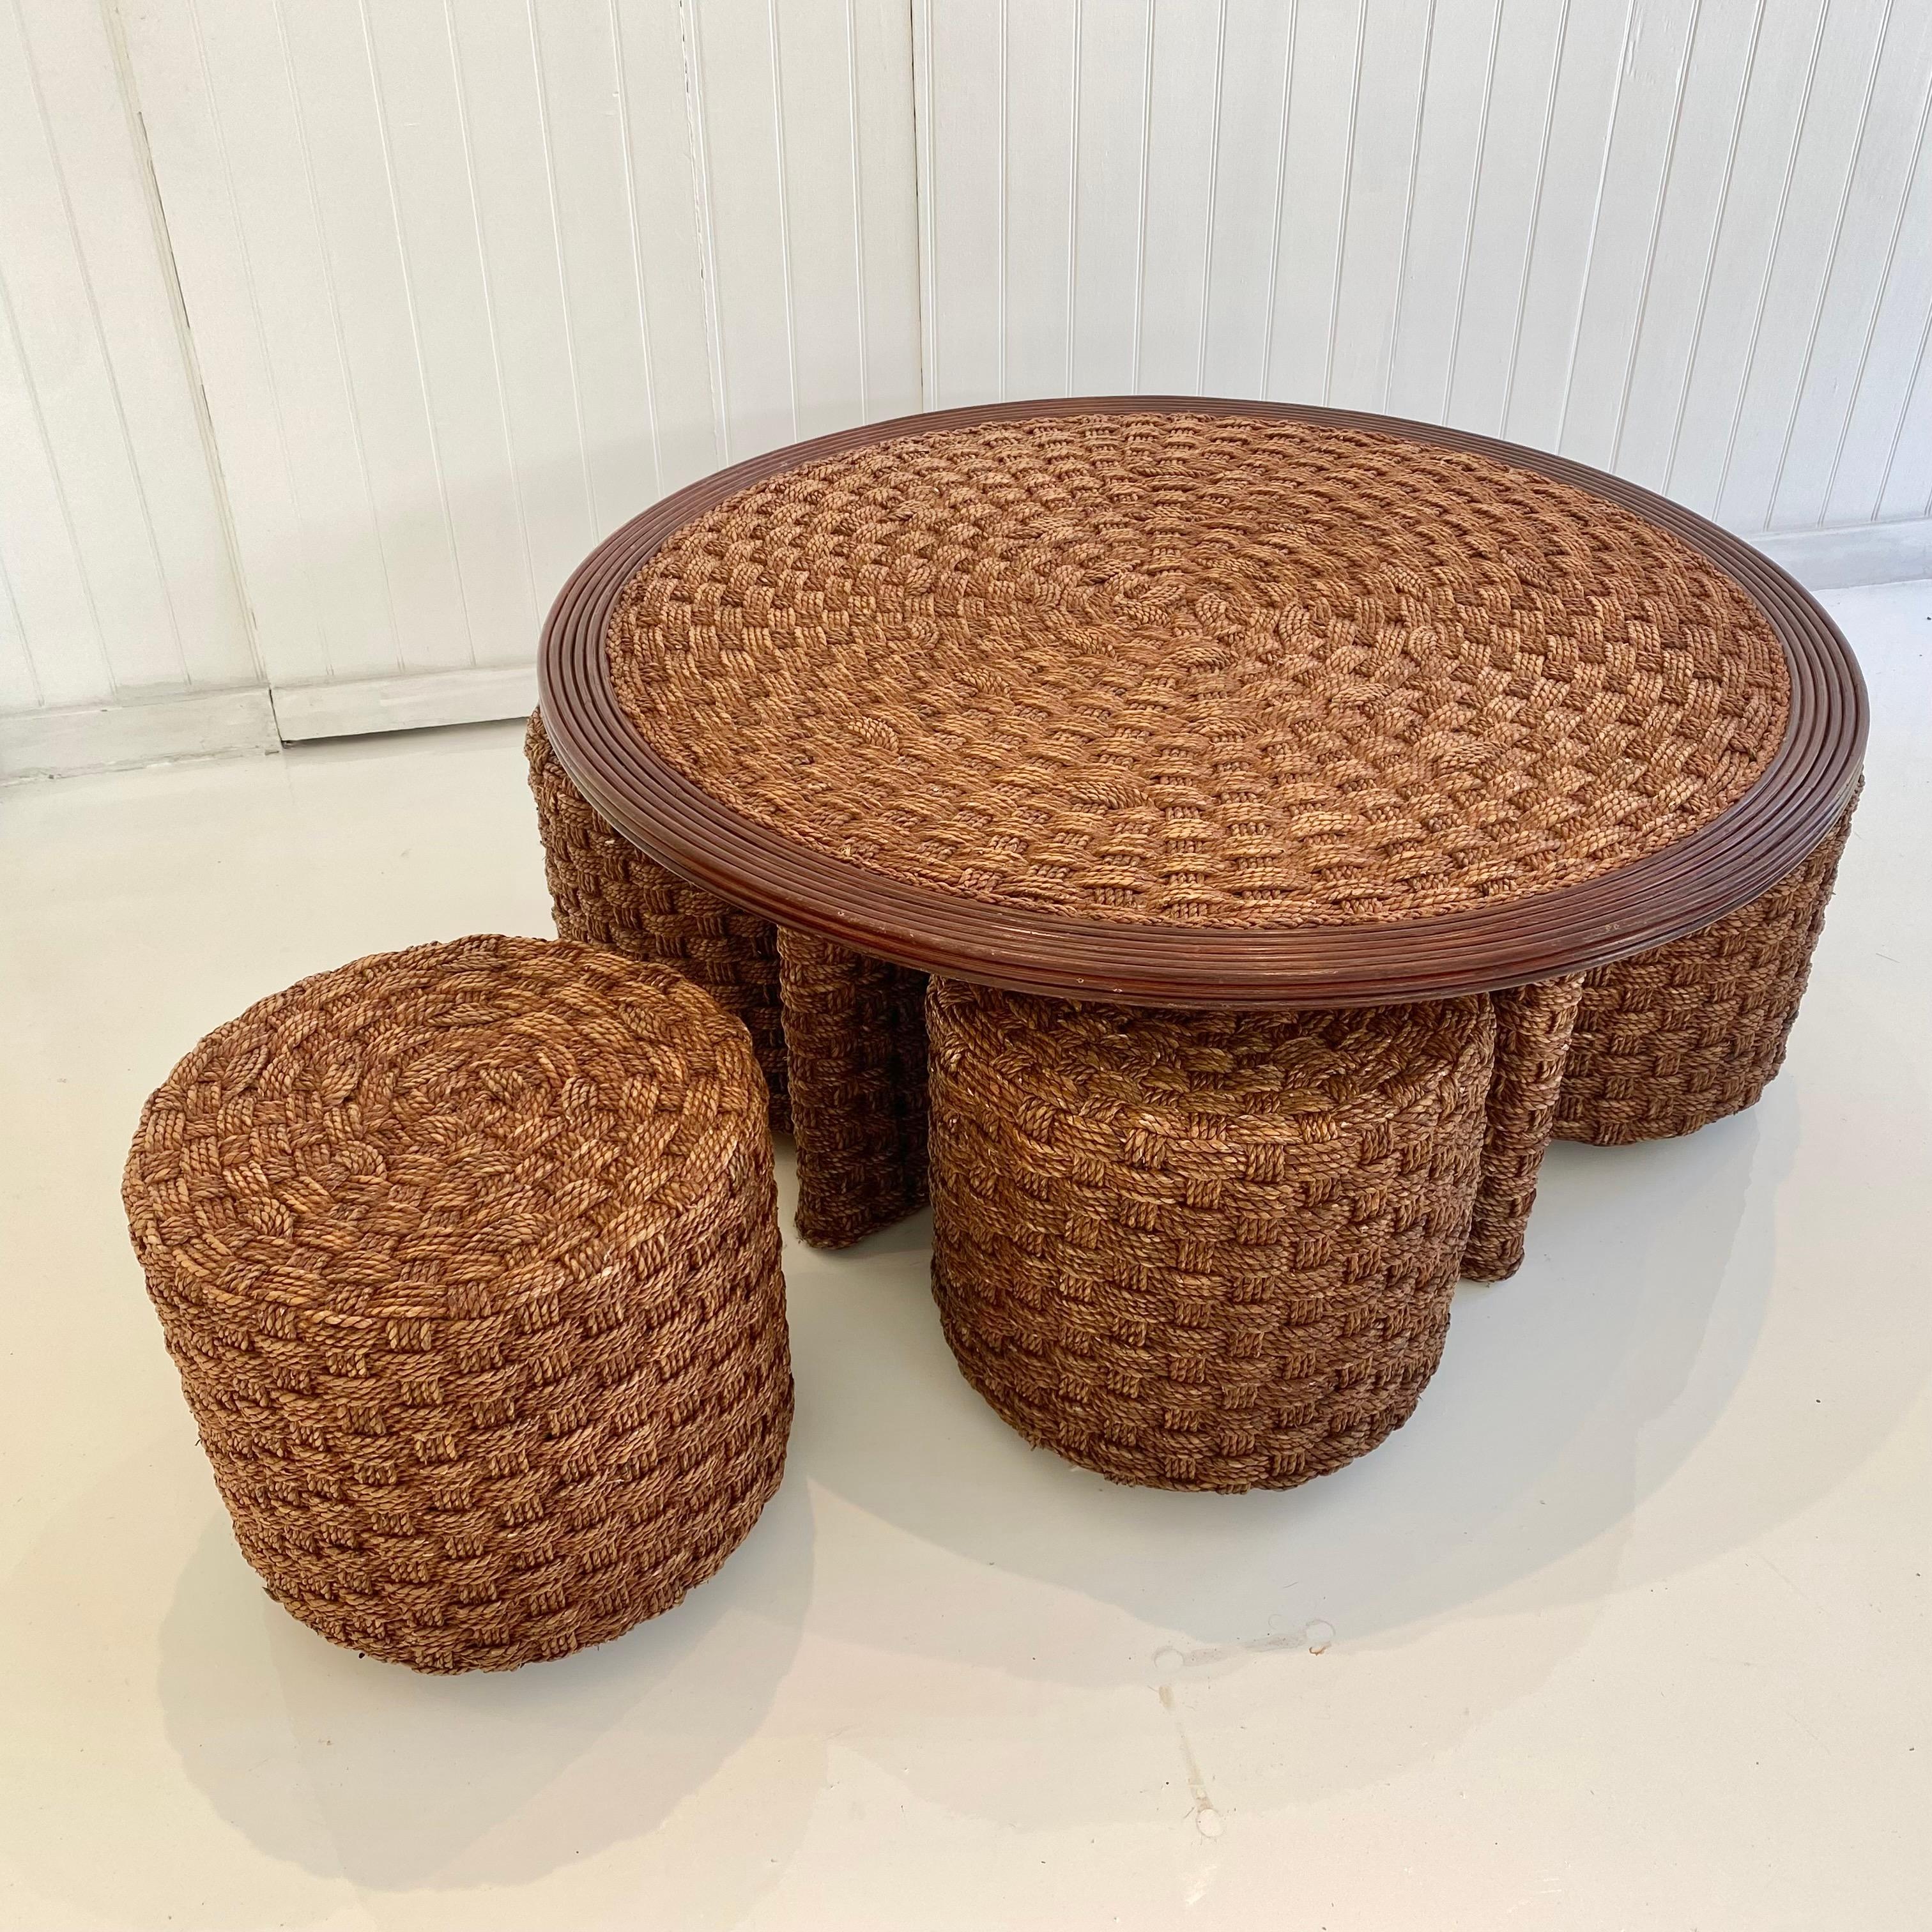 Unique rope and wood table with four matching rope stools. Perfect indoors or in a covered patio. Rope is woven flat in a criss cross pattern. Four stools tuck away neatly under table top and fit snug around the table base. Eye catching set, adding